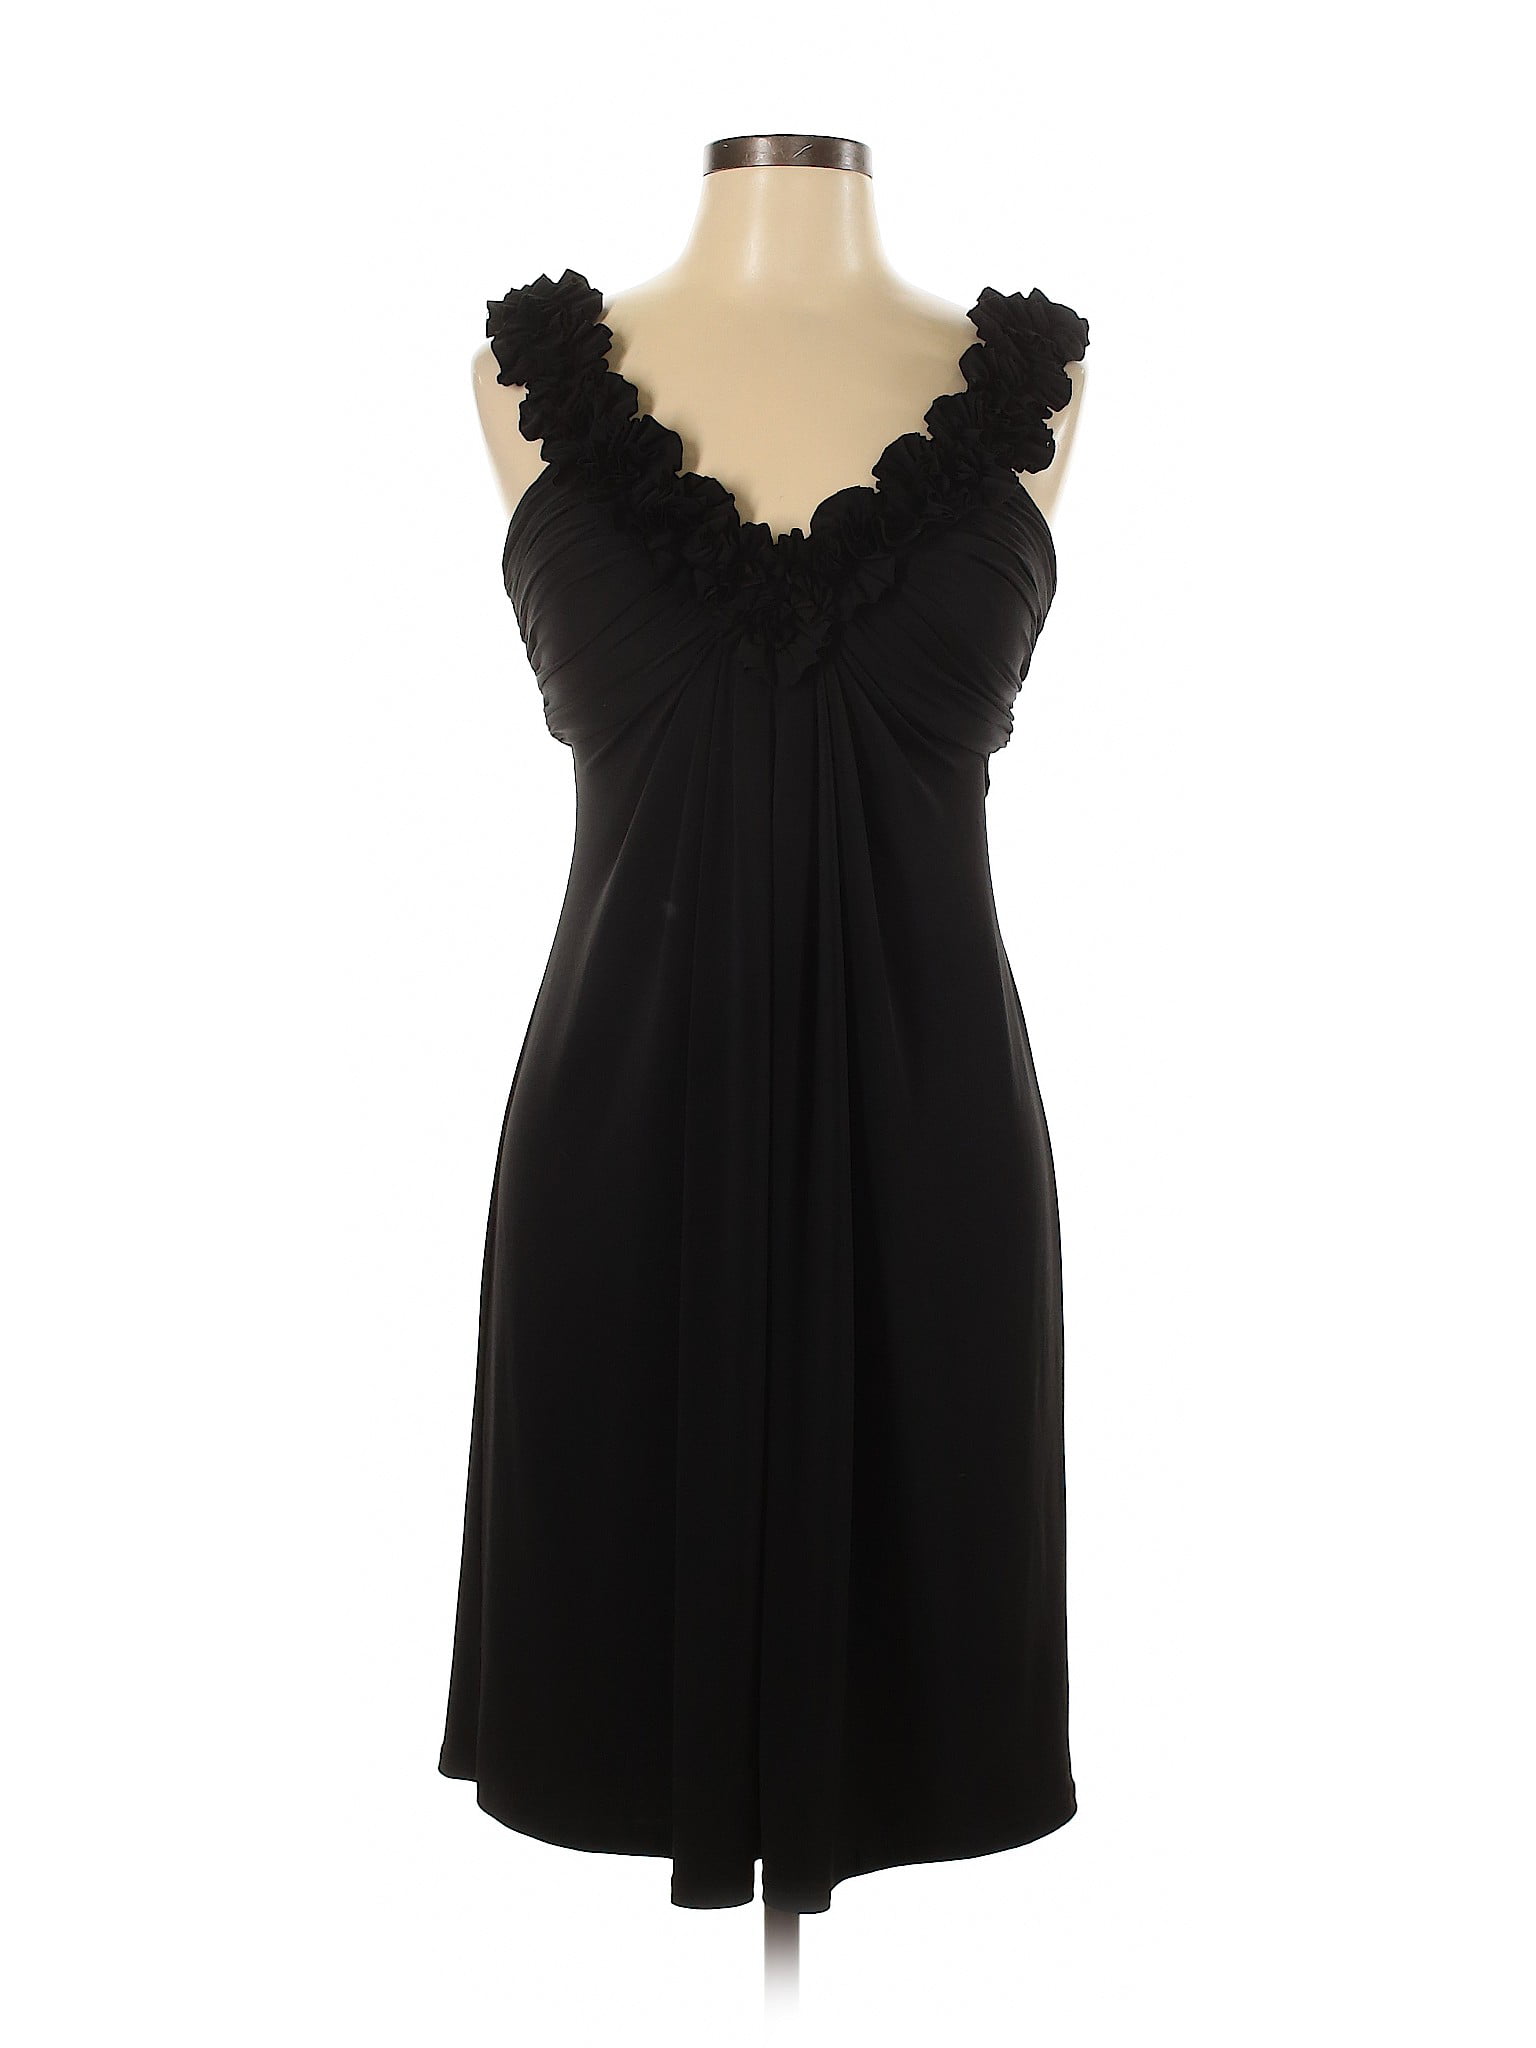 Maggy London - Pre-Owned Maggy London Women's Size 6 Cocktail Dress ...